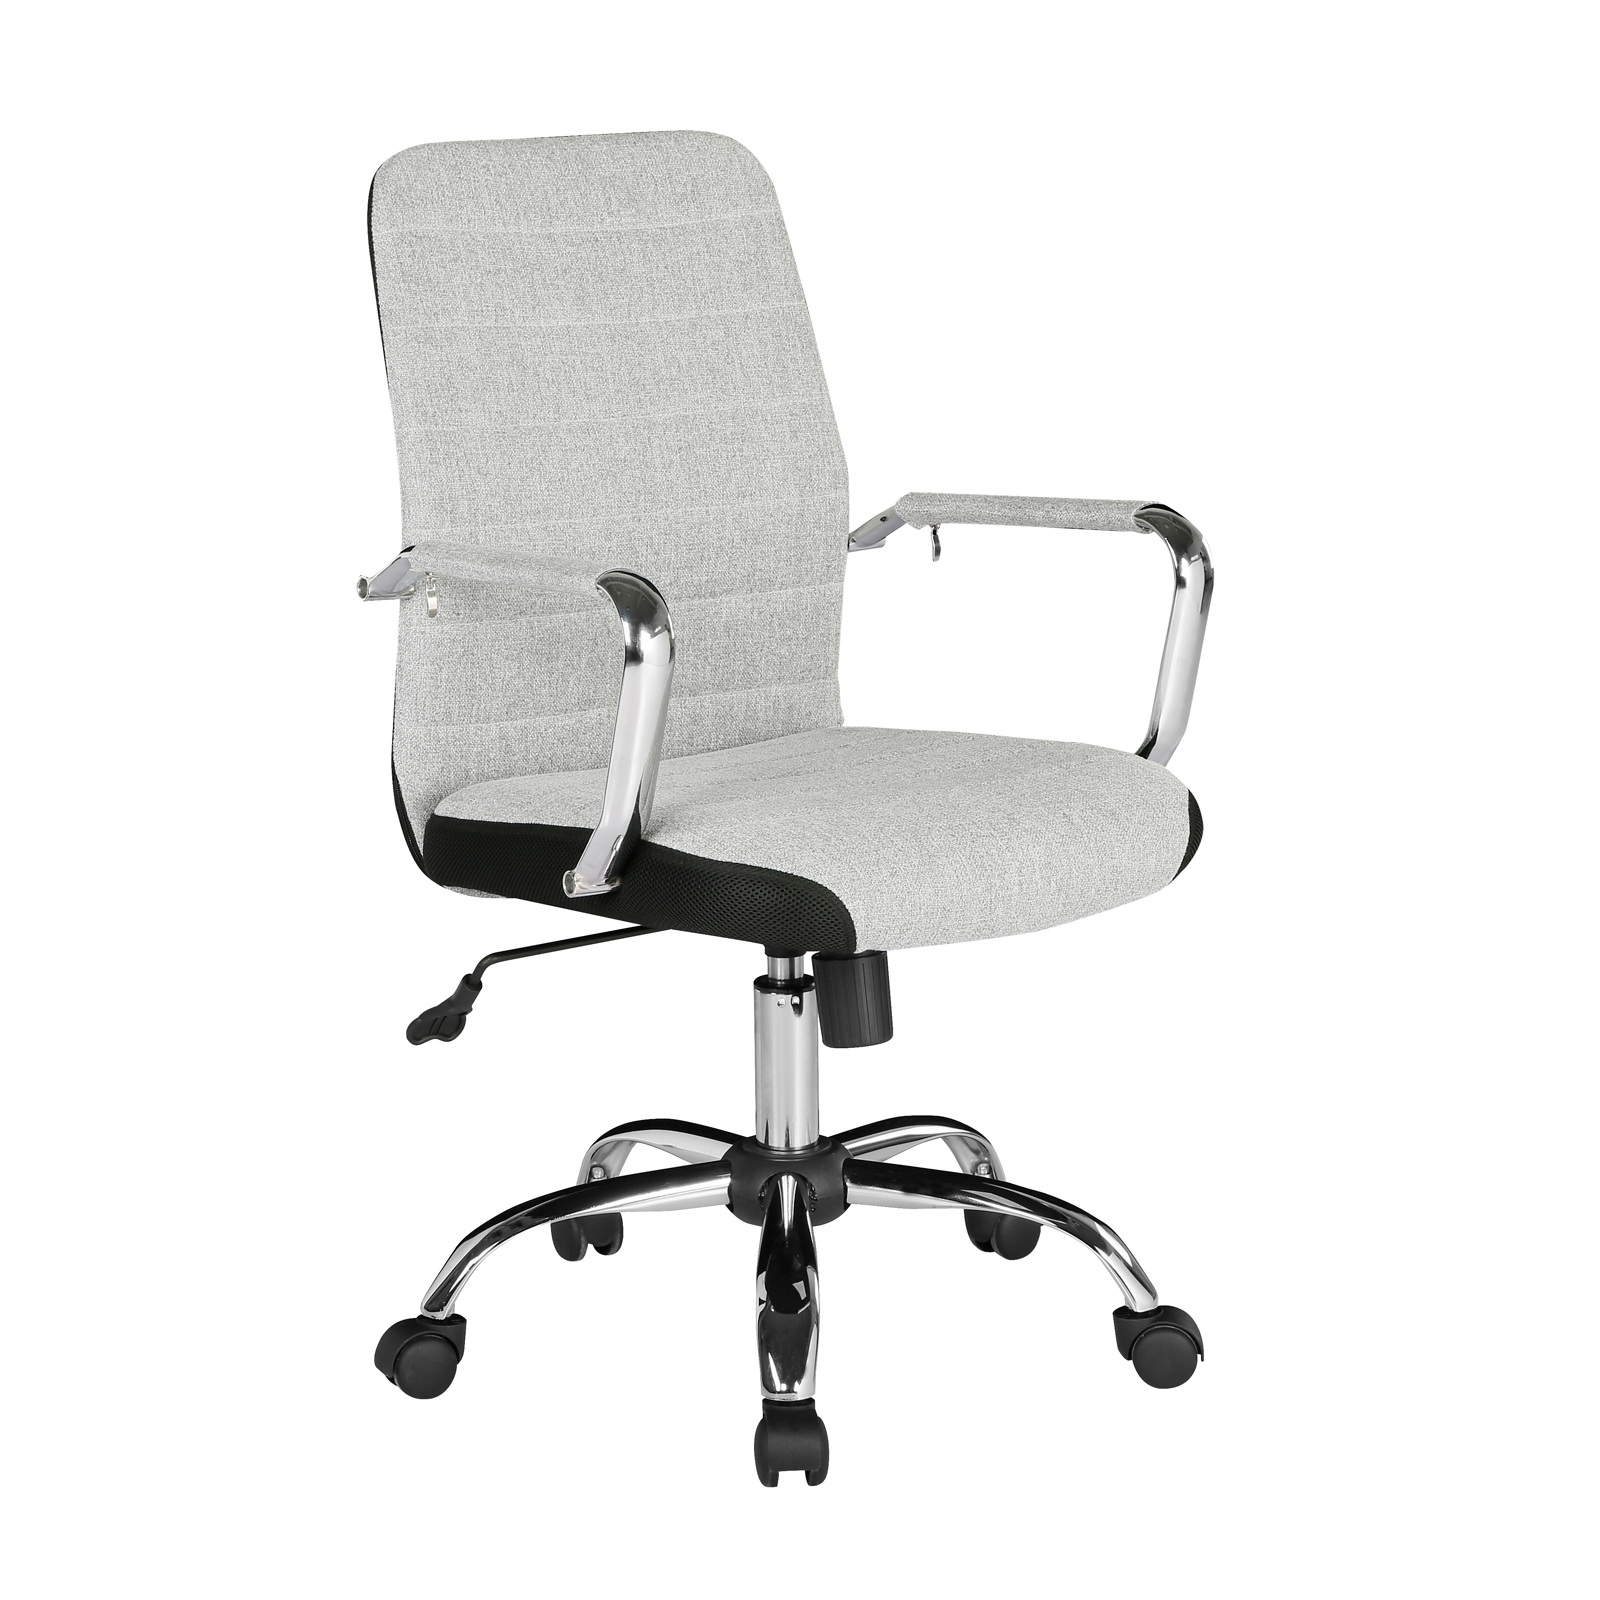 Tempo high back fabric operators chair with mesh trim - grey